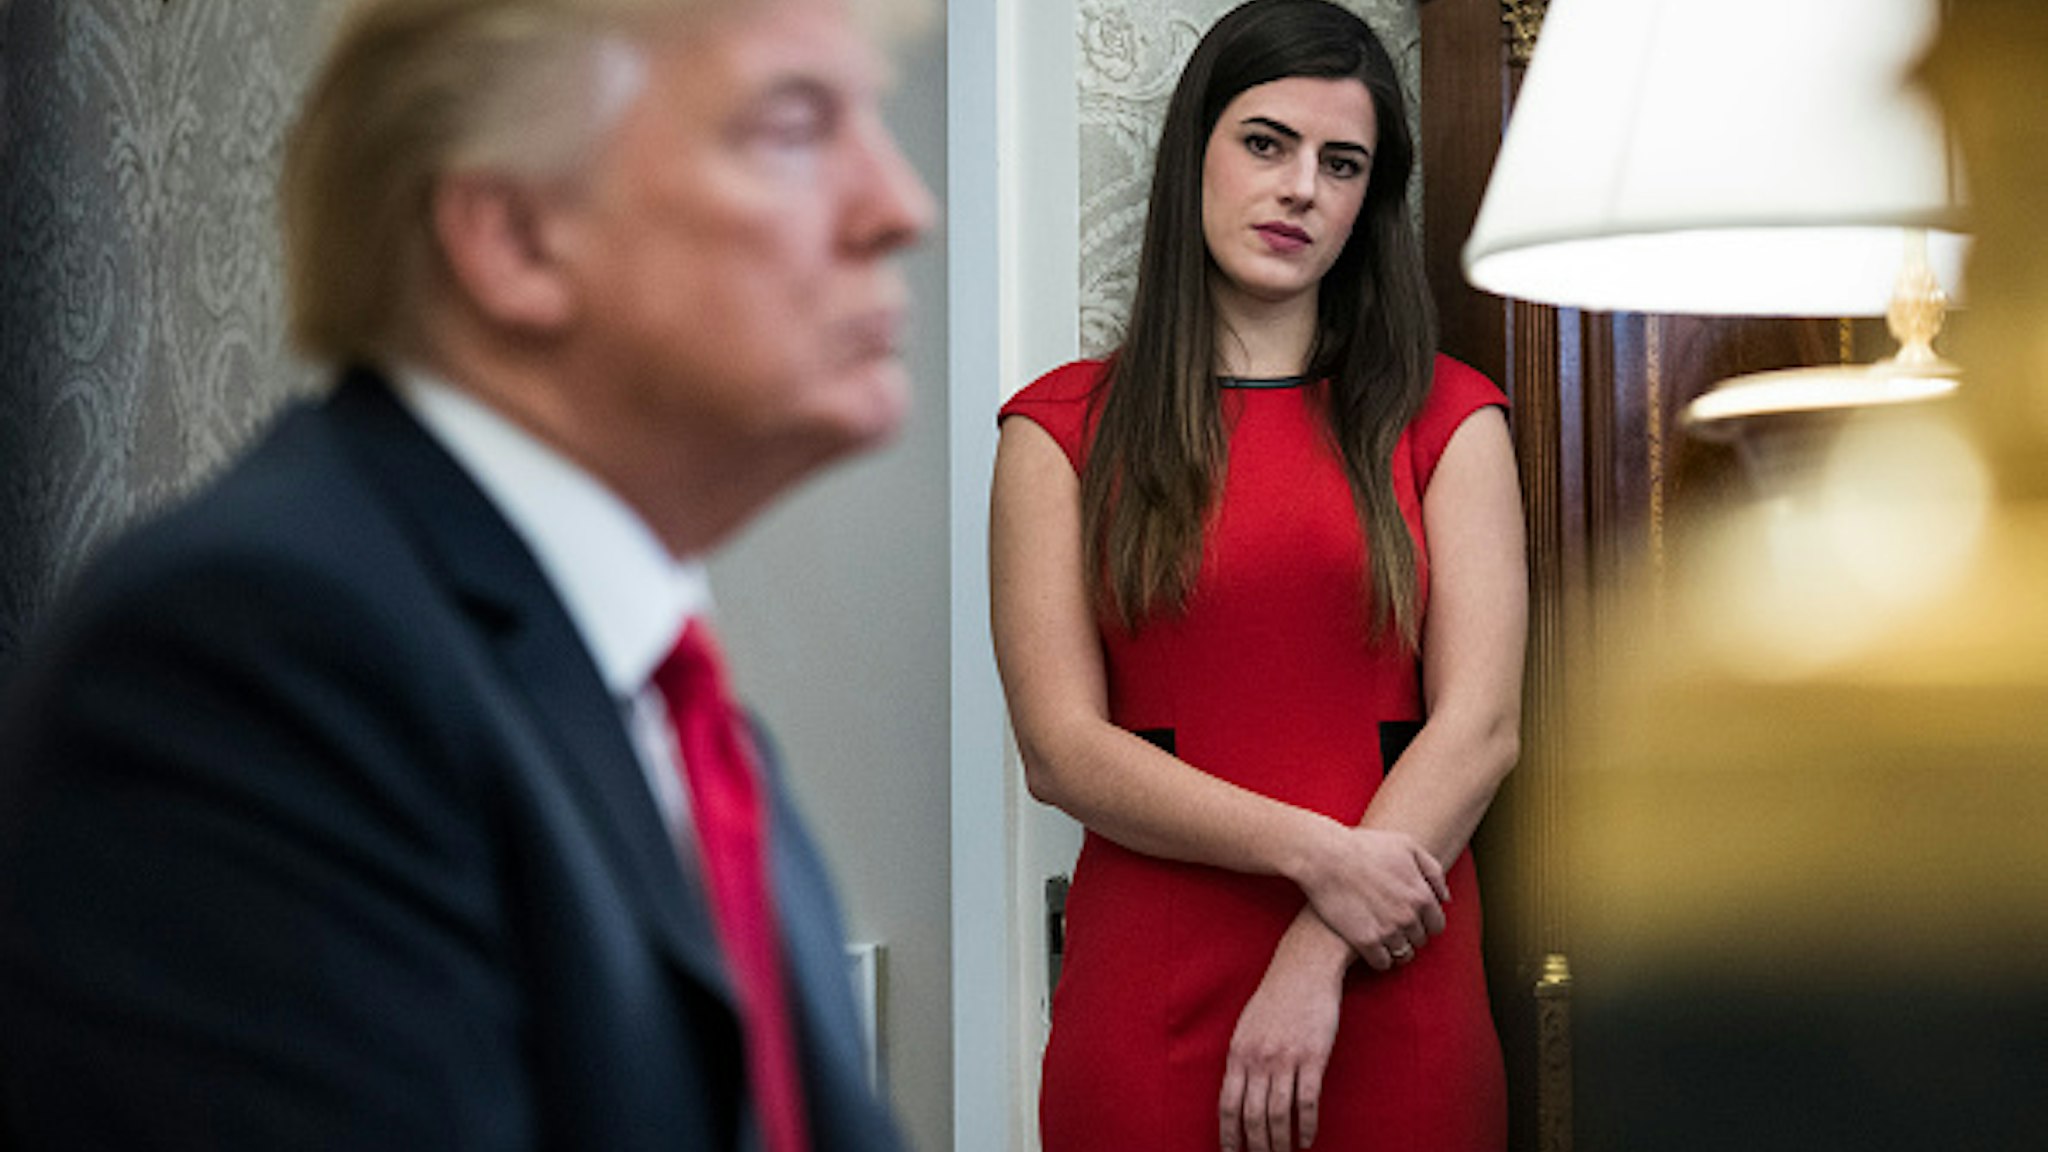 Madeleine Westerhout watches as President Donald Trump speaks during a meeting with North Korean defectors in the Oval Office at the White House in Washington, DC on Friday, Feb. 02, 2018.